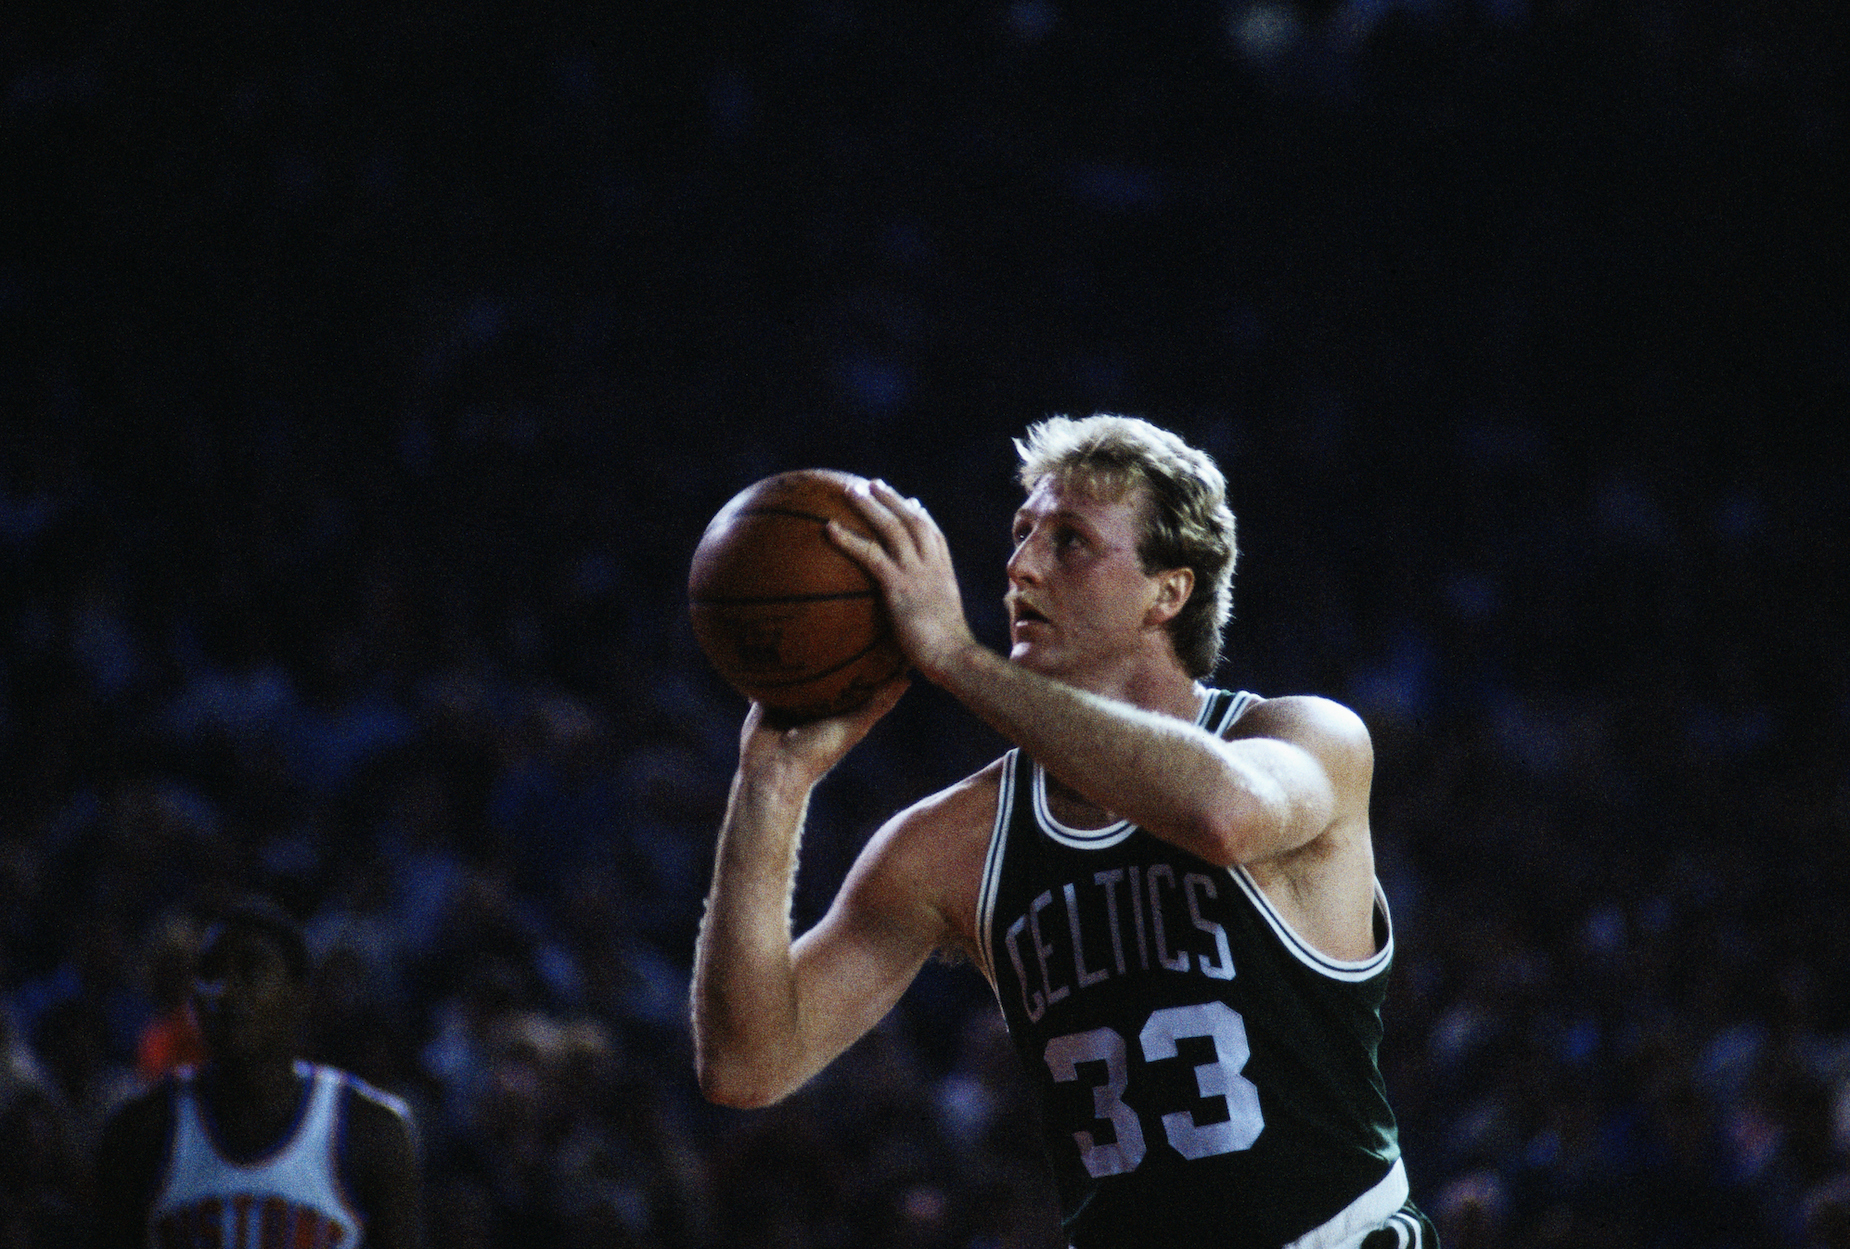 Larry Bird lines-up a free thrown during his time with the Boston Celtics.